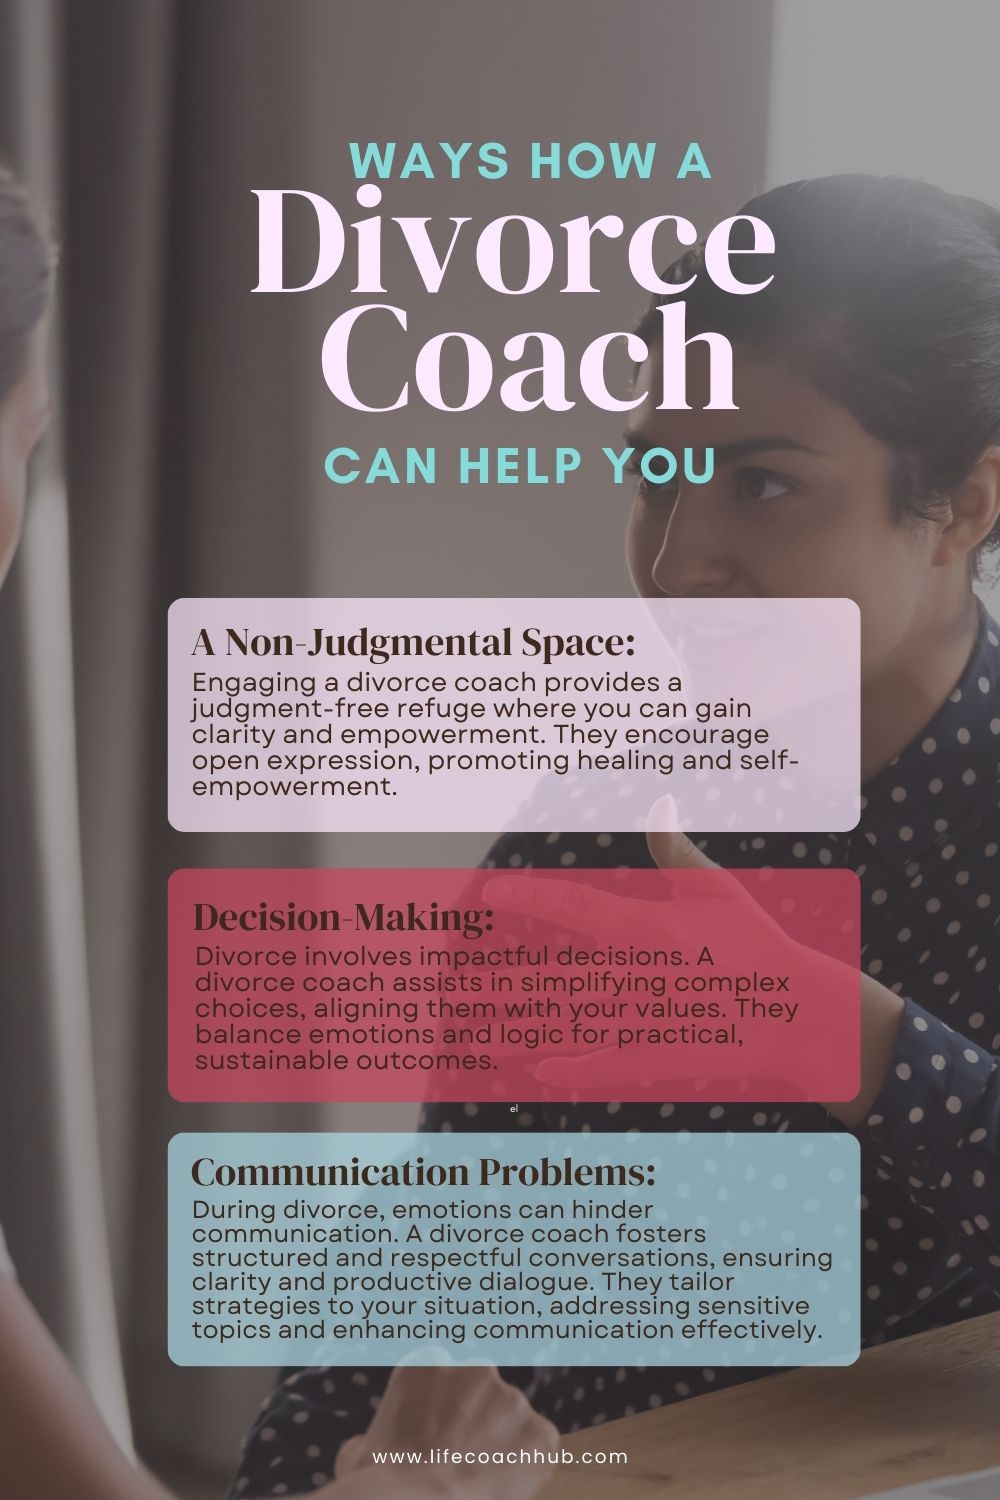 How a divorce coach can help you